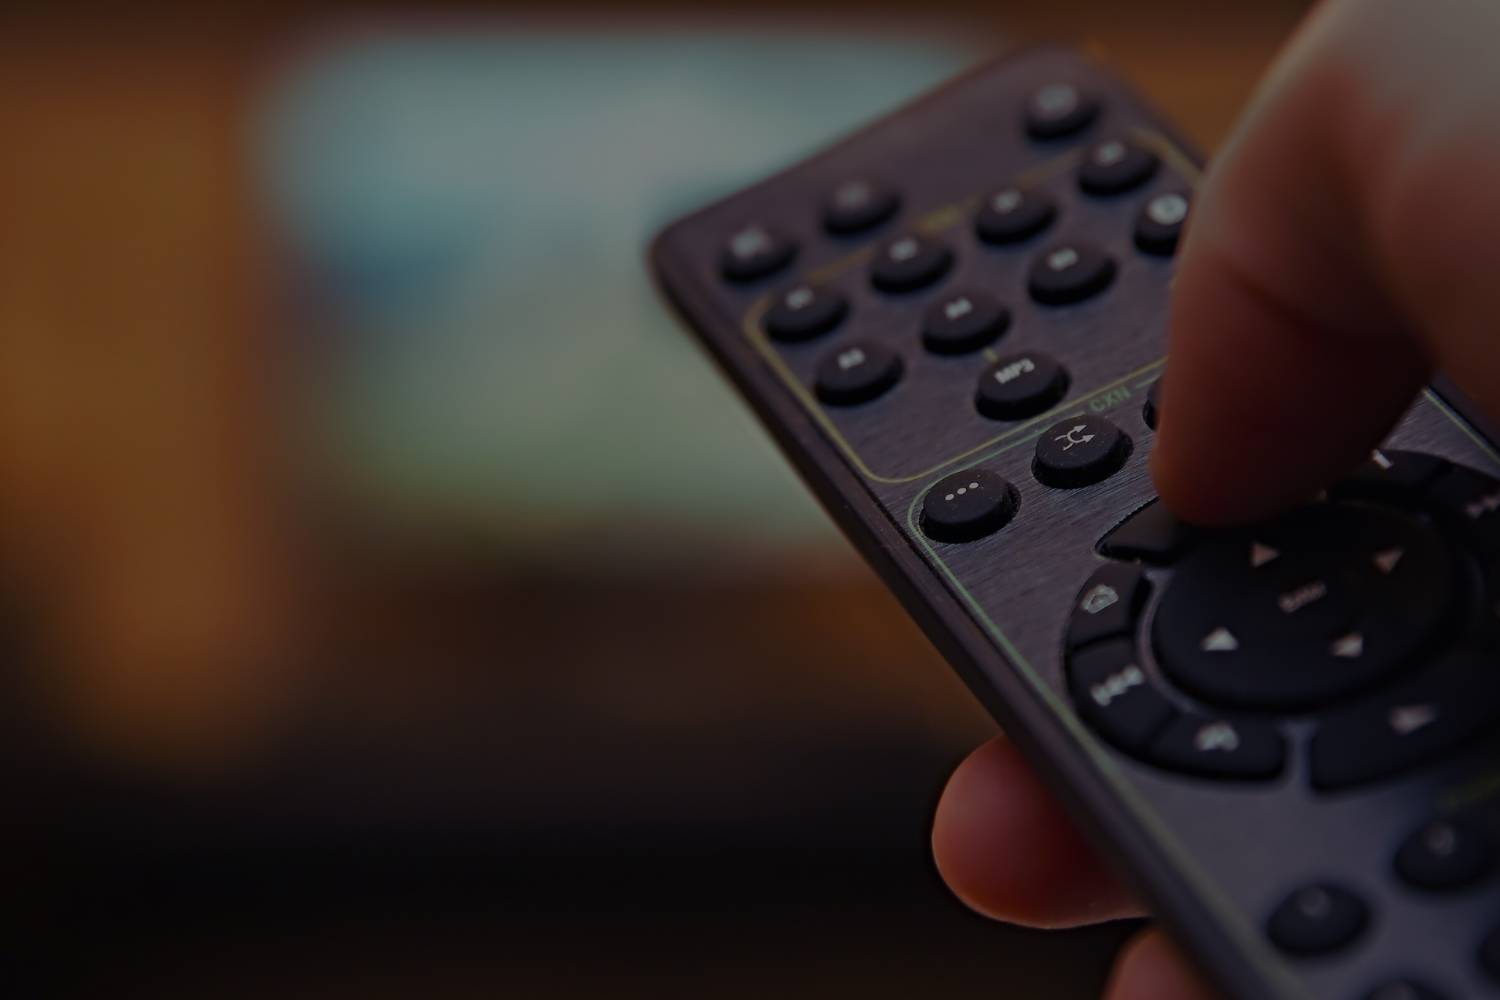 Television remote being pointed at Television